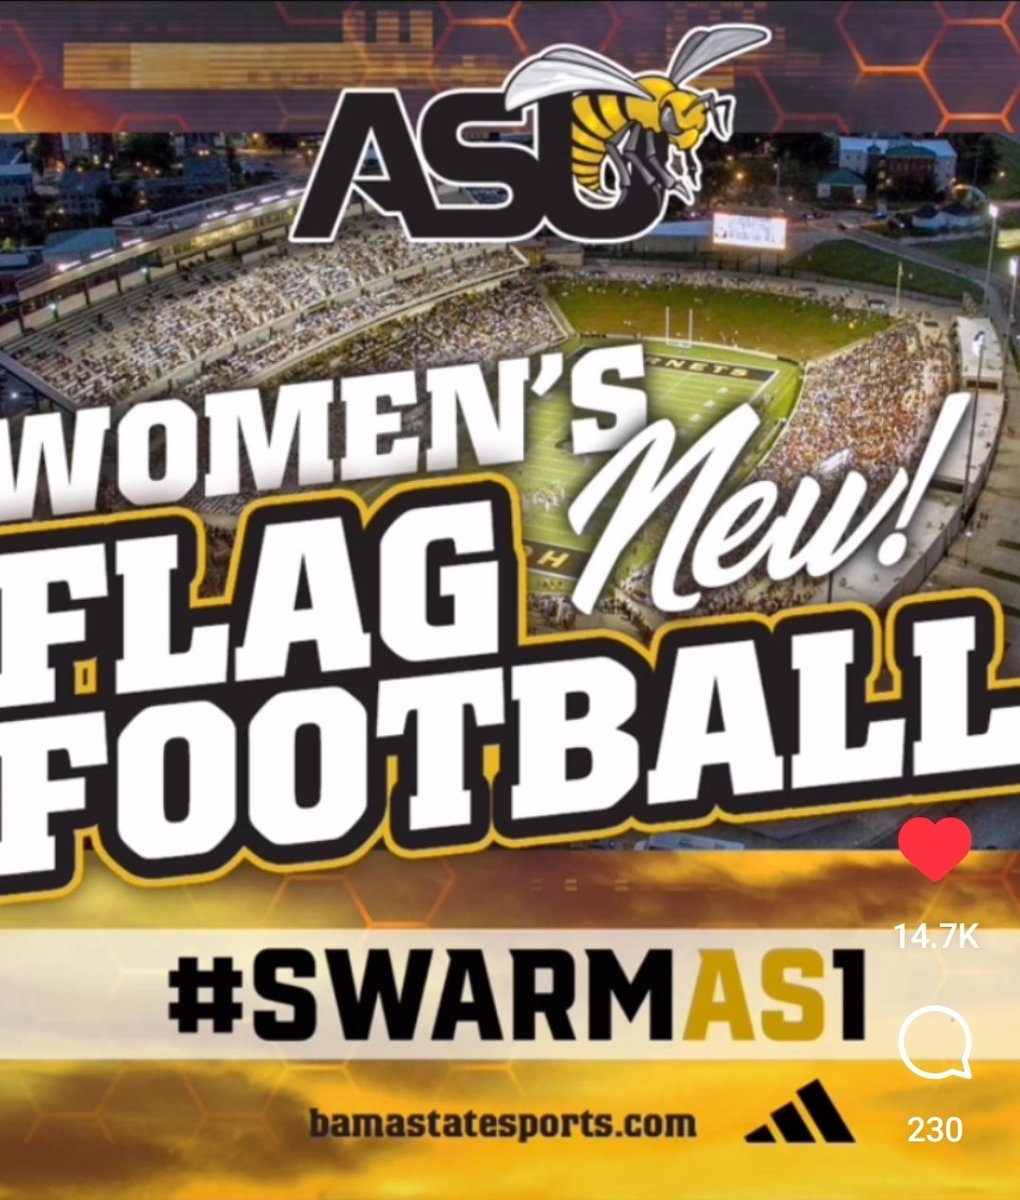 🏉 Girls Flag Football #Opportunity at the collegiate level the first of many, as the sport continues to grow! @LegacyFlag22 @BamaStateSports instagram.com/reel/C5RbCxvLz…